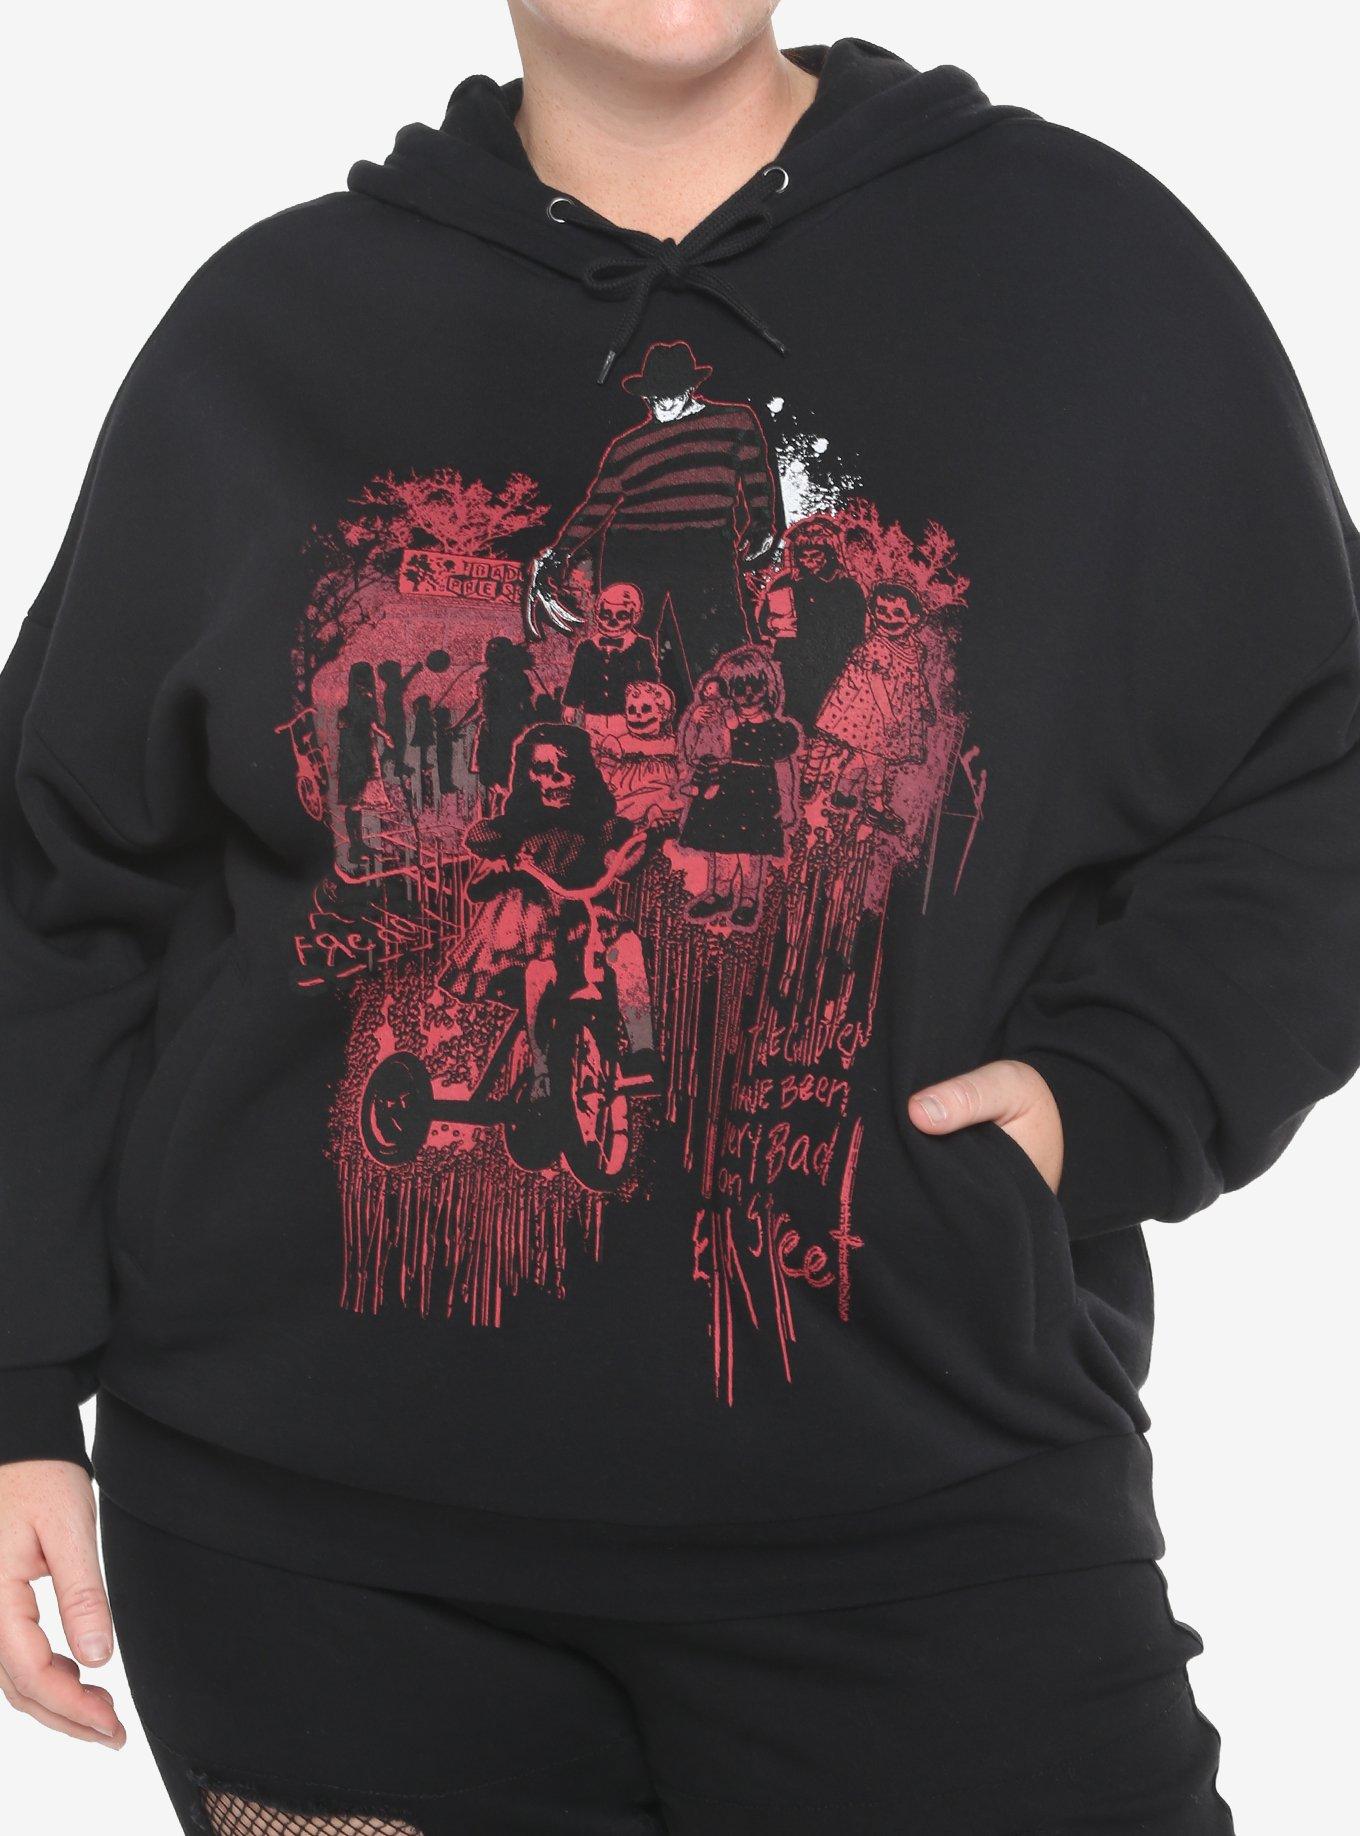 A Nightmare On Elm Street The Children Have Been Very Bad Hoodie Girls Plus Size, MULTI, hi-res